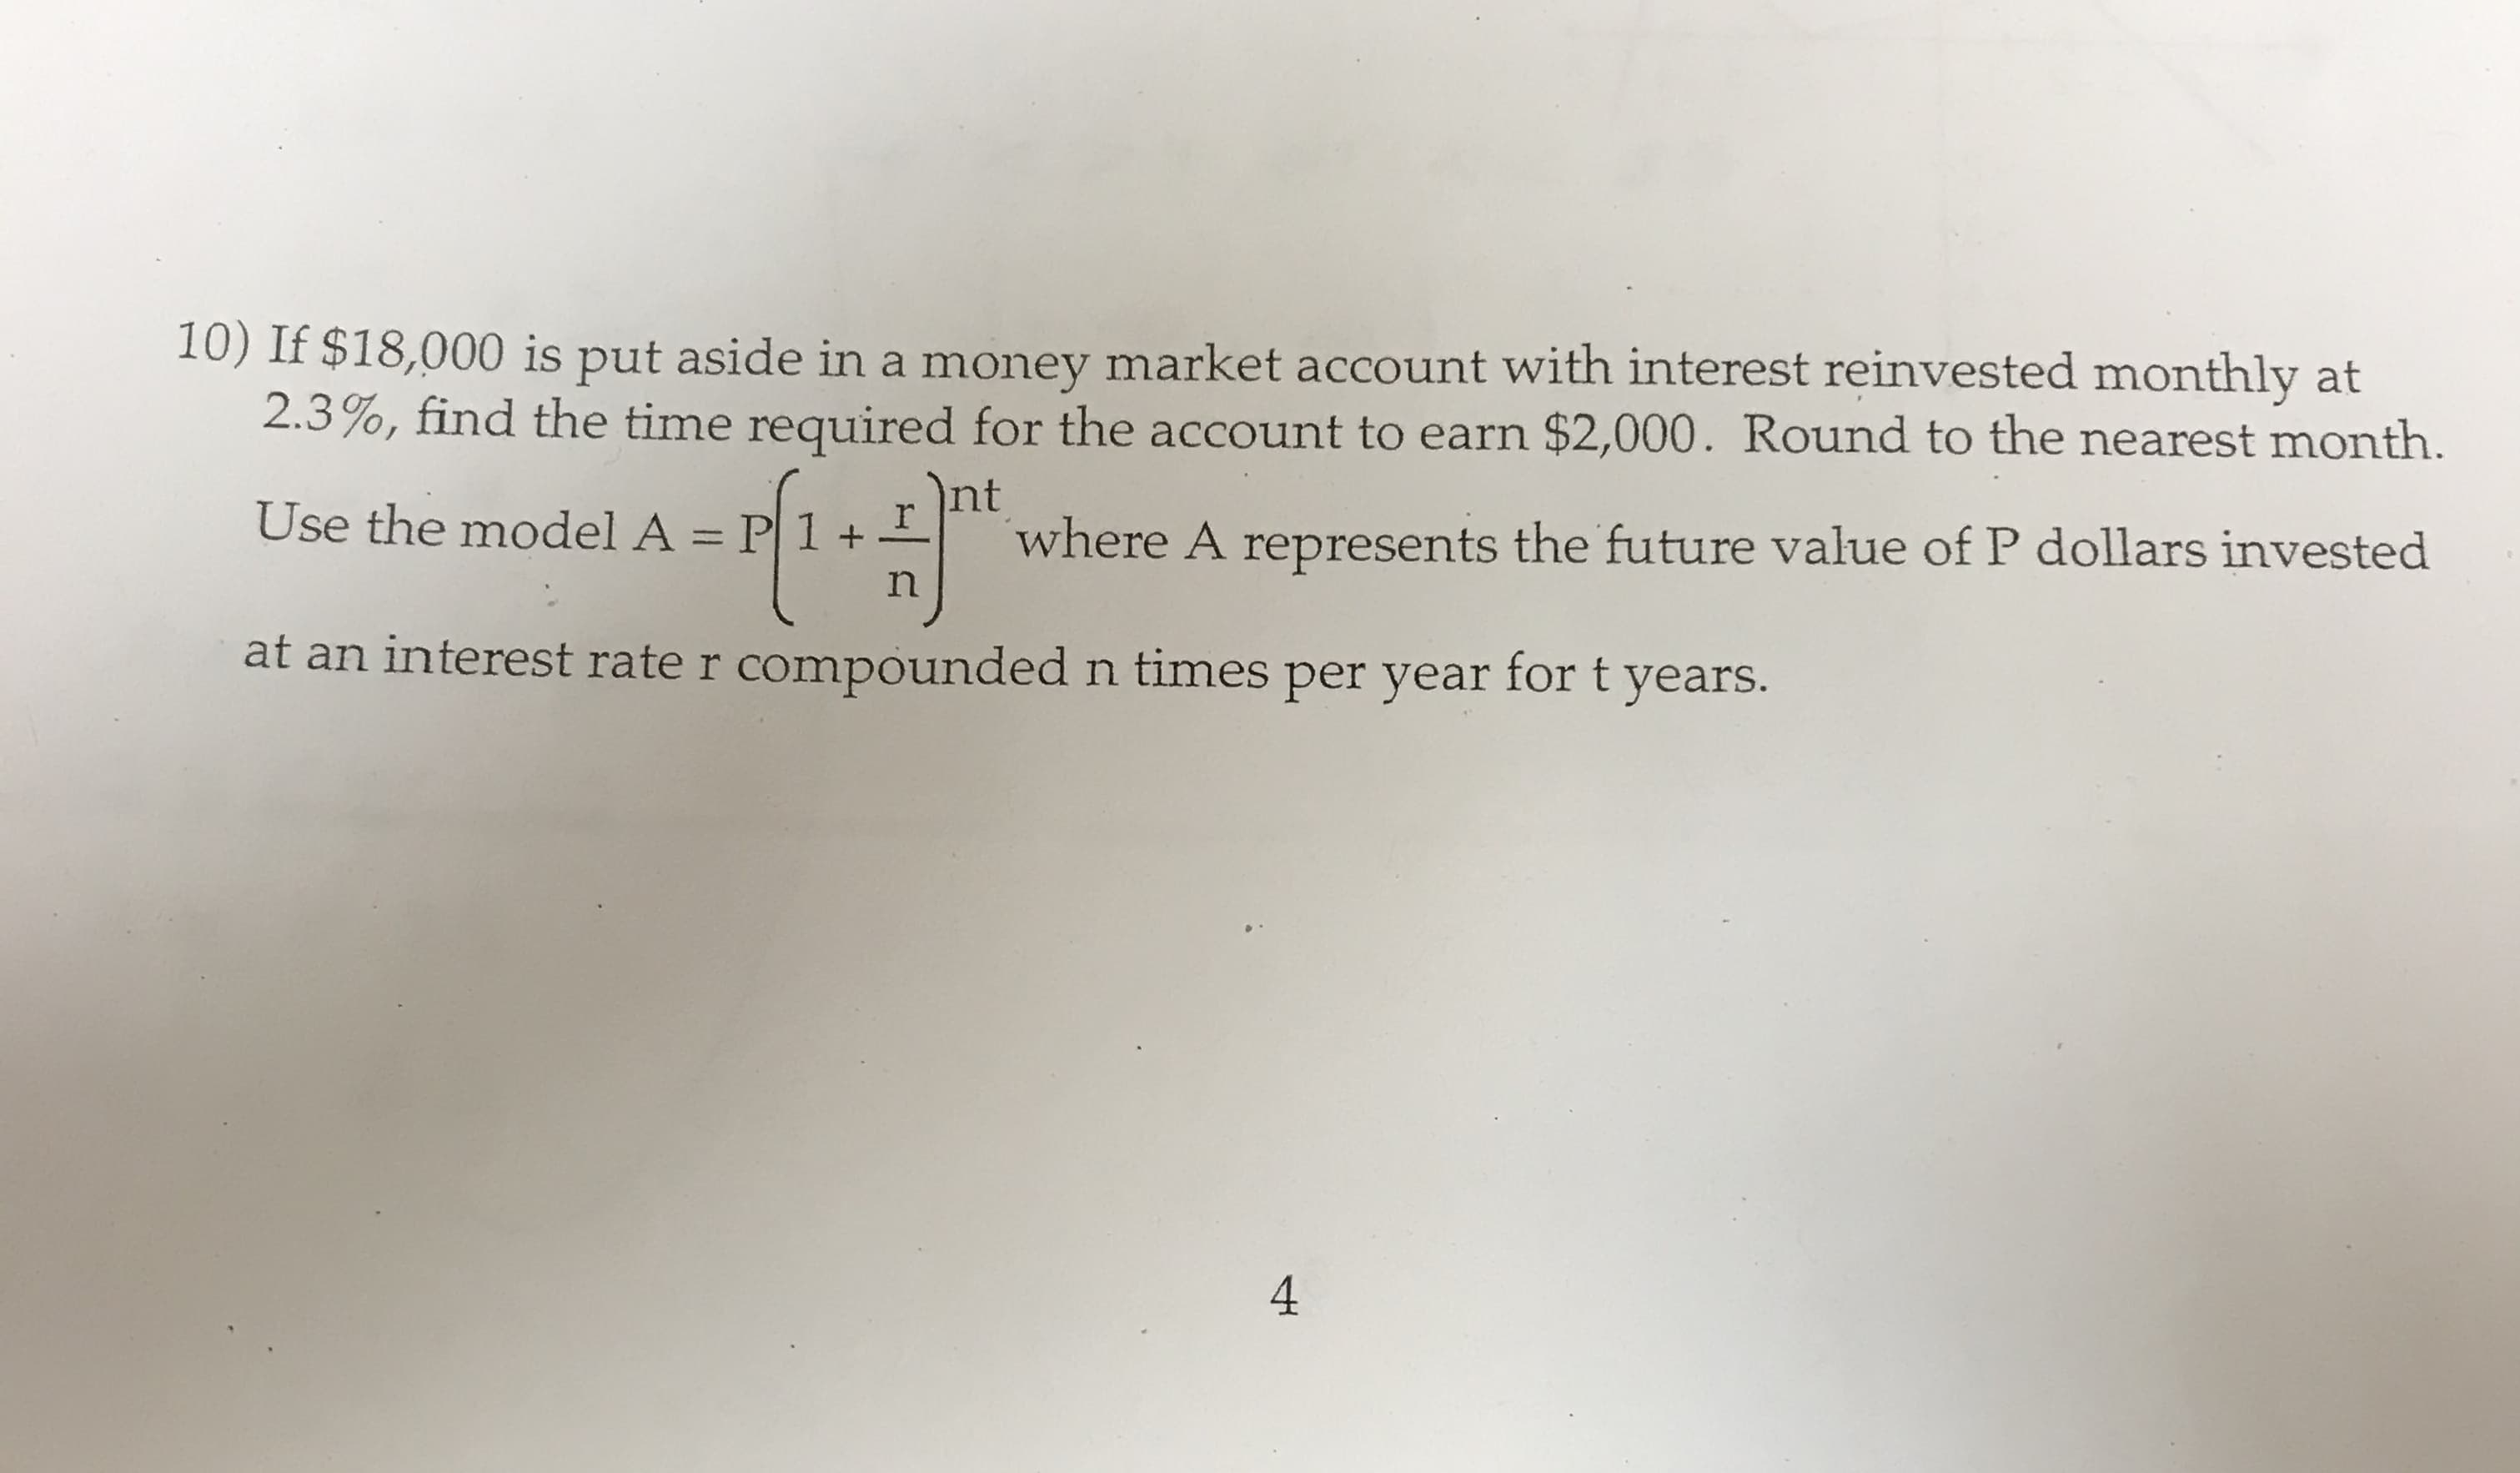 10) If $18,000 is put aside in a money market account with interest reinvested monthly at
2.3%, find the time required for the account to earn $2,000. Round to the nearest month.
Int
Use the model A = P 1 +
where A represents the future value of P dollars invested
at an interest rate r compounded n times per year fort years.
4
